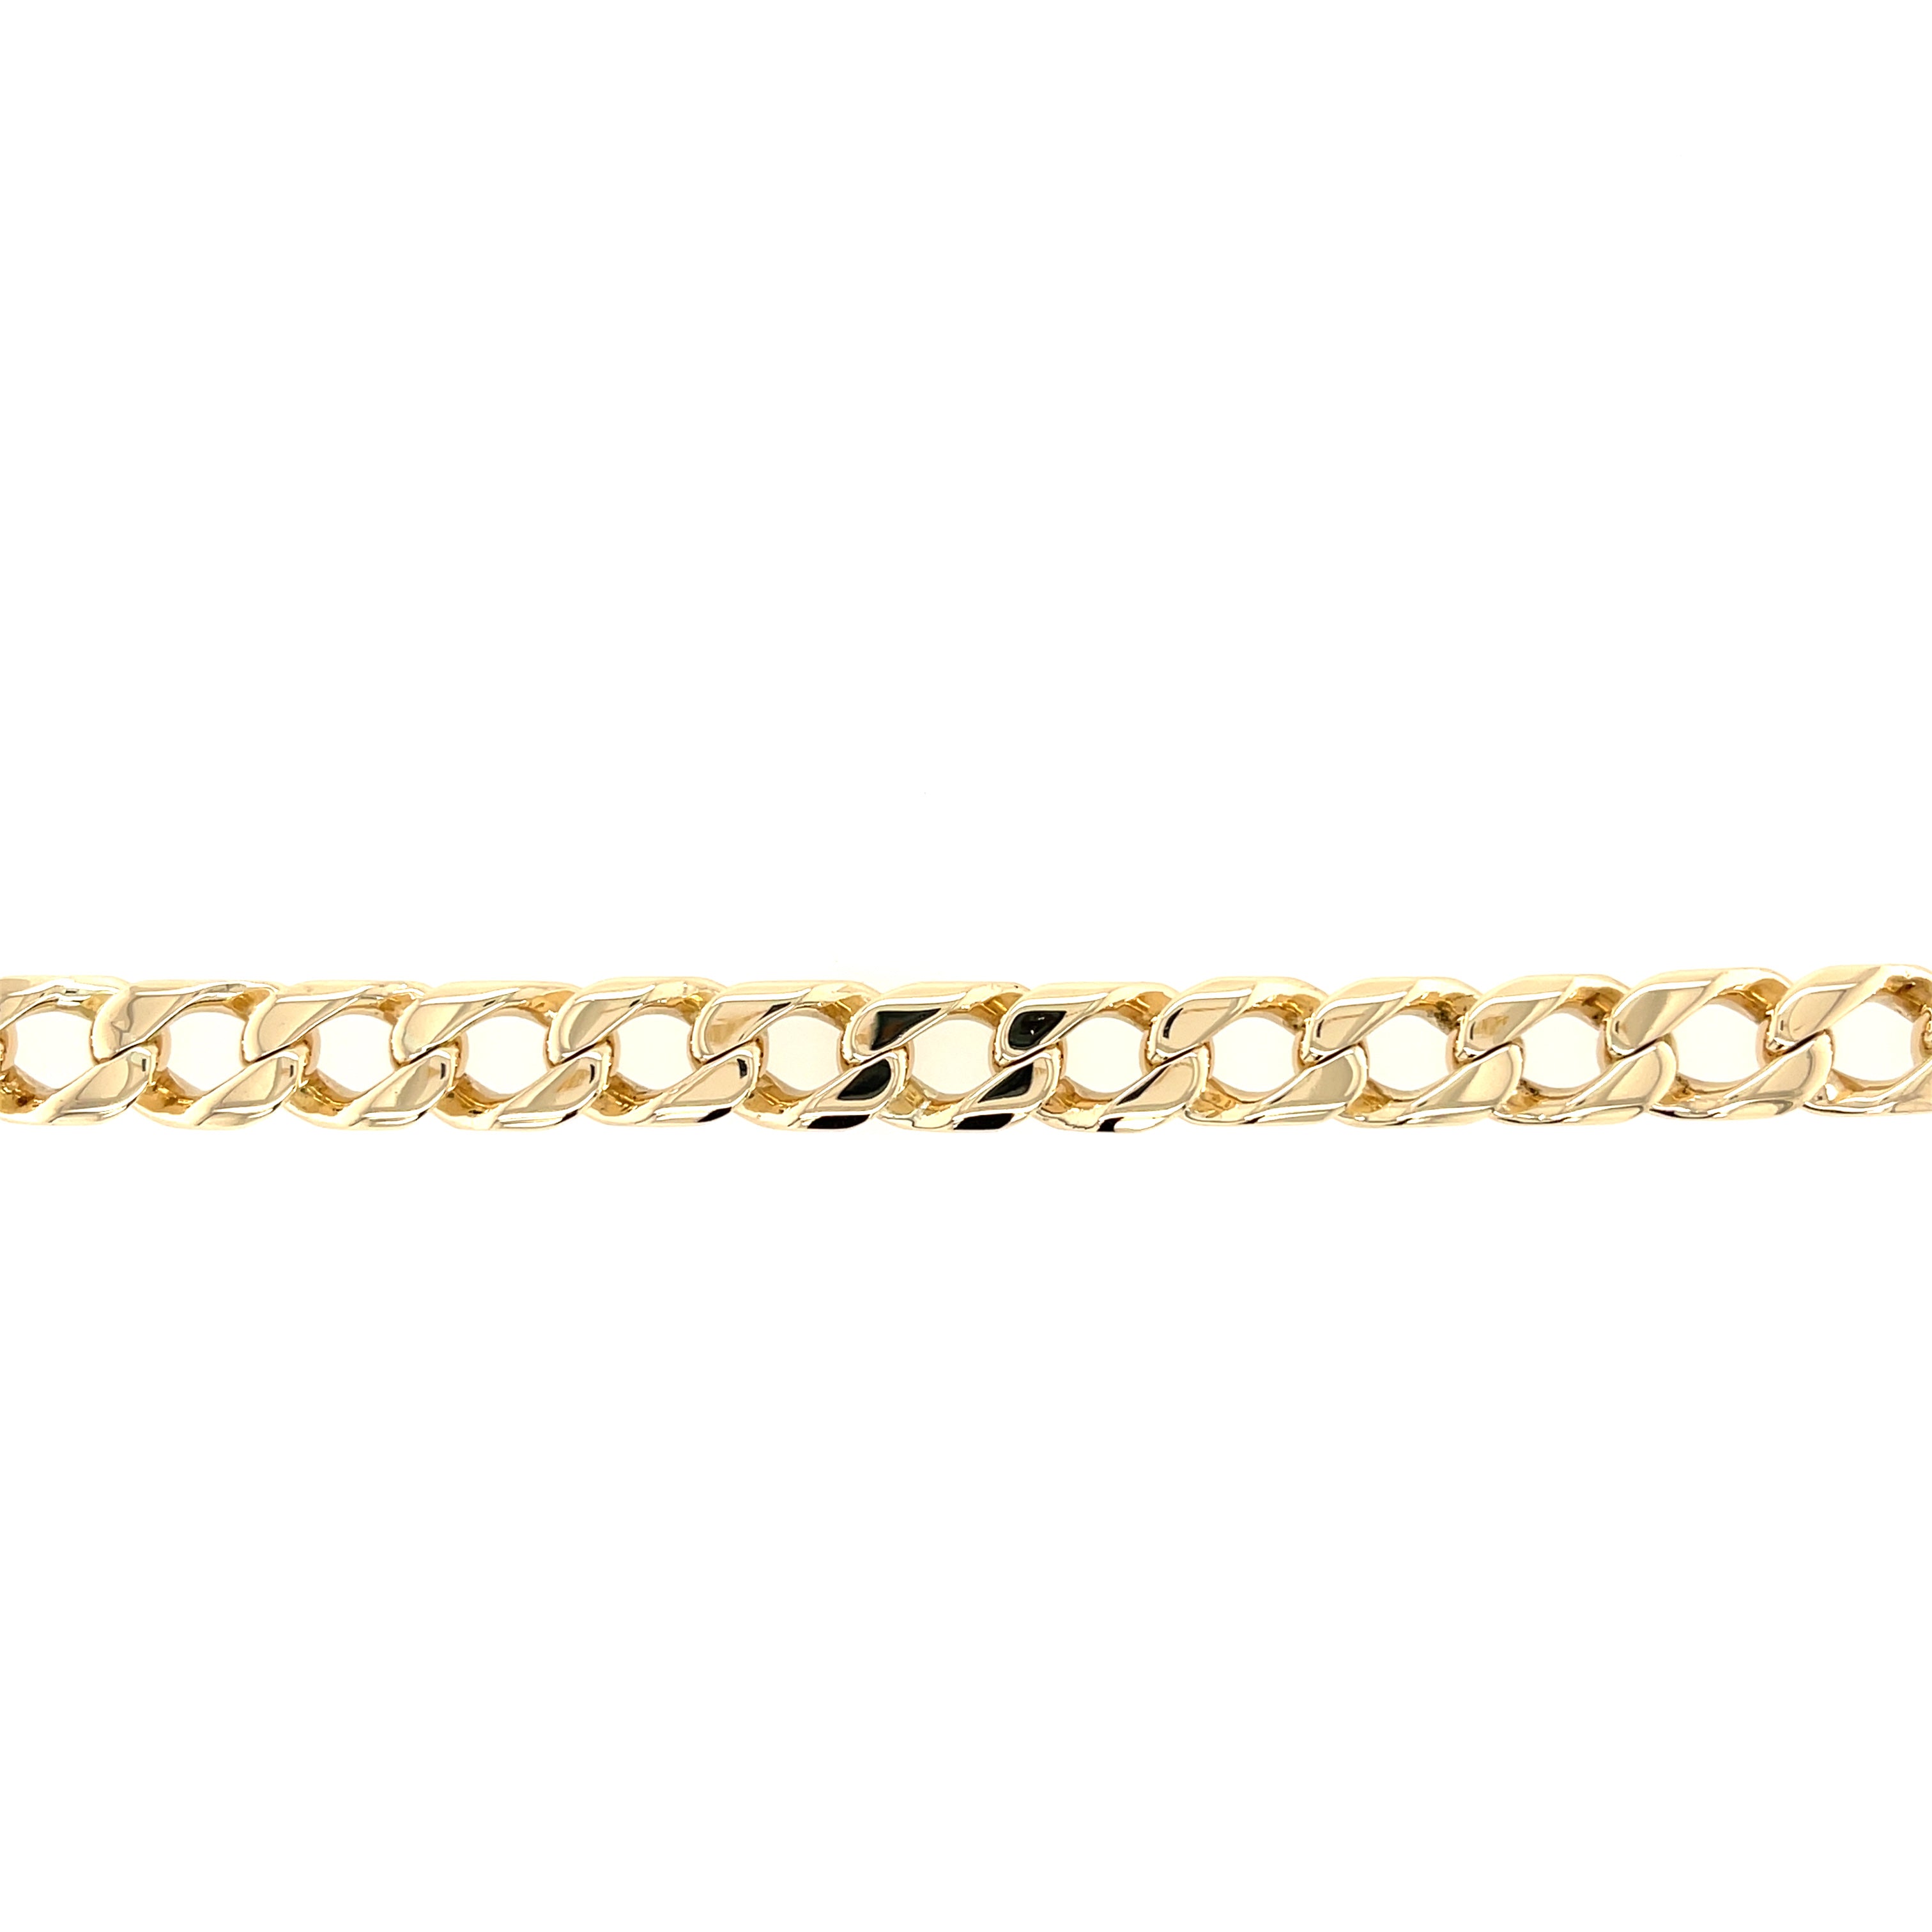 9ct Yellow Gold 9 Inch Curb Link Bracelet - 37.56g